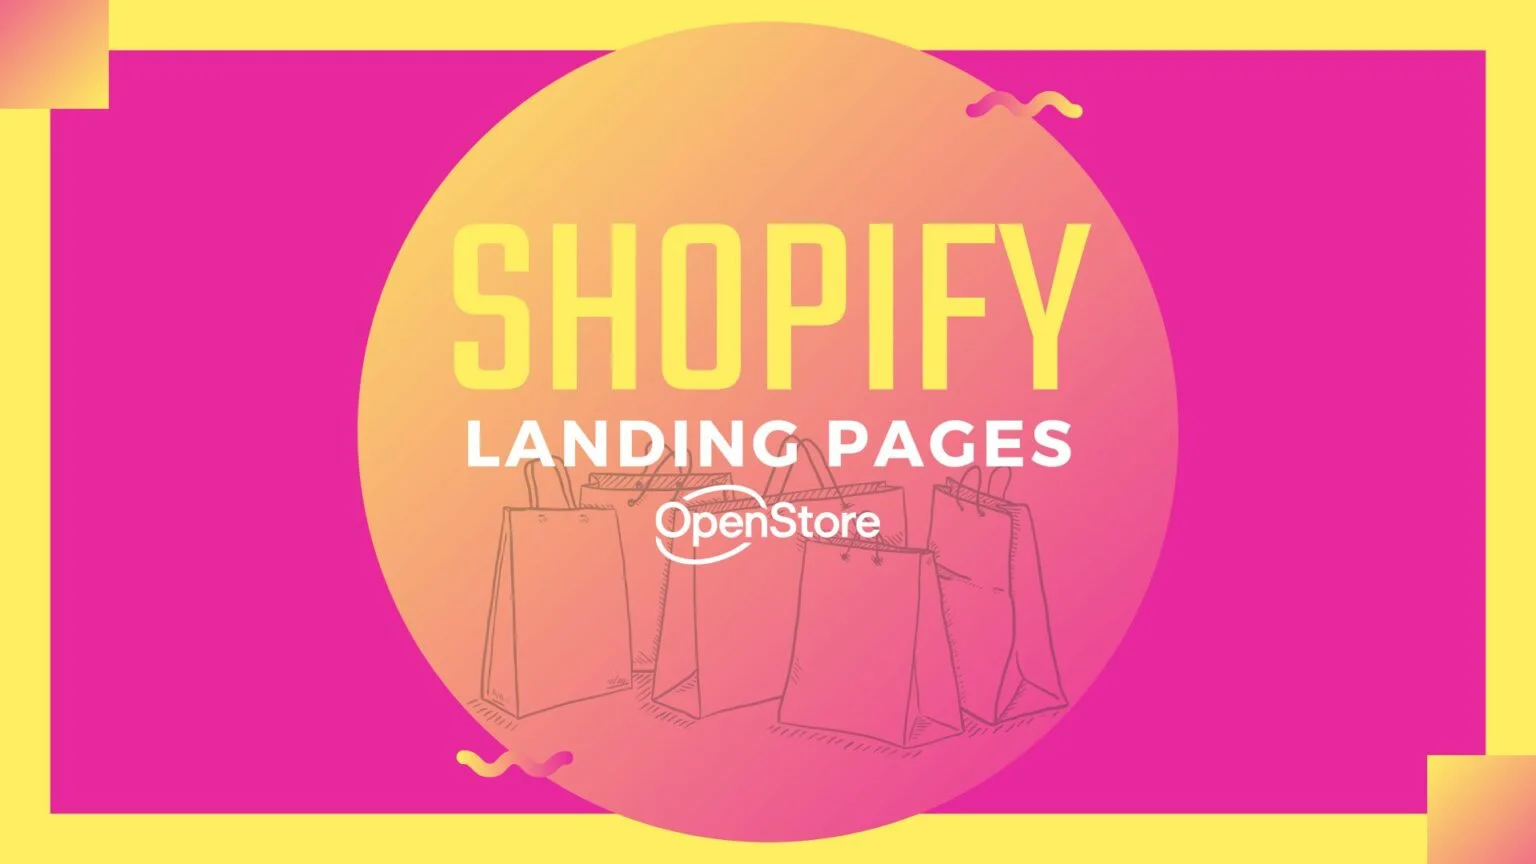 9 Tips for Effective Shopify Landing Pages